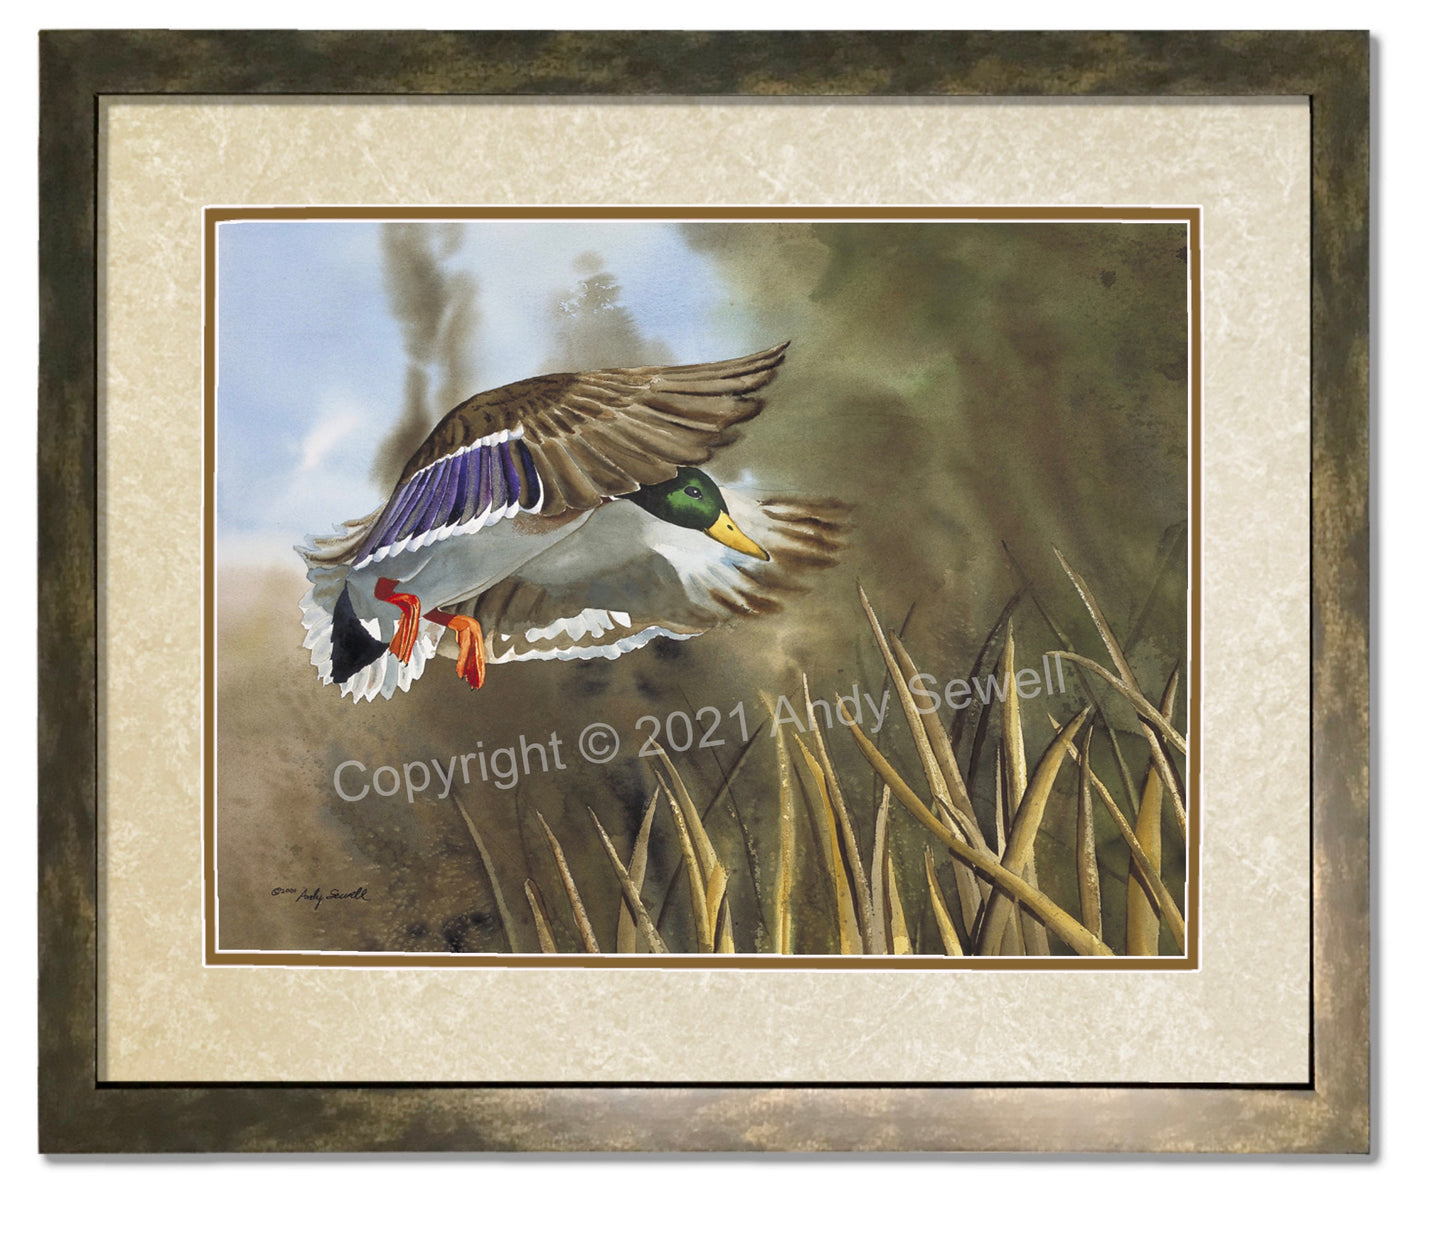 "Drake Dropping In" - An open edition Giclee art print from an Original watercolor, Duck wall art